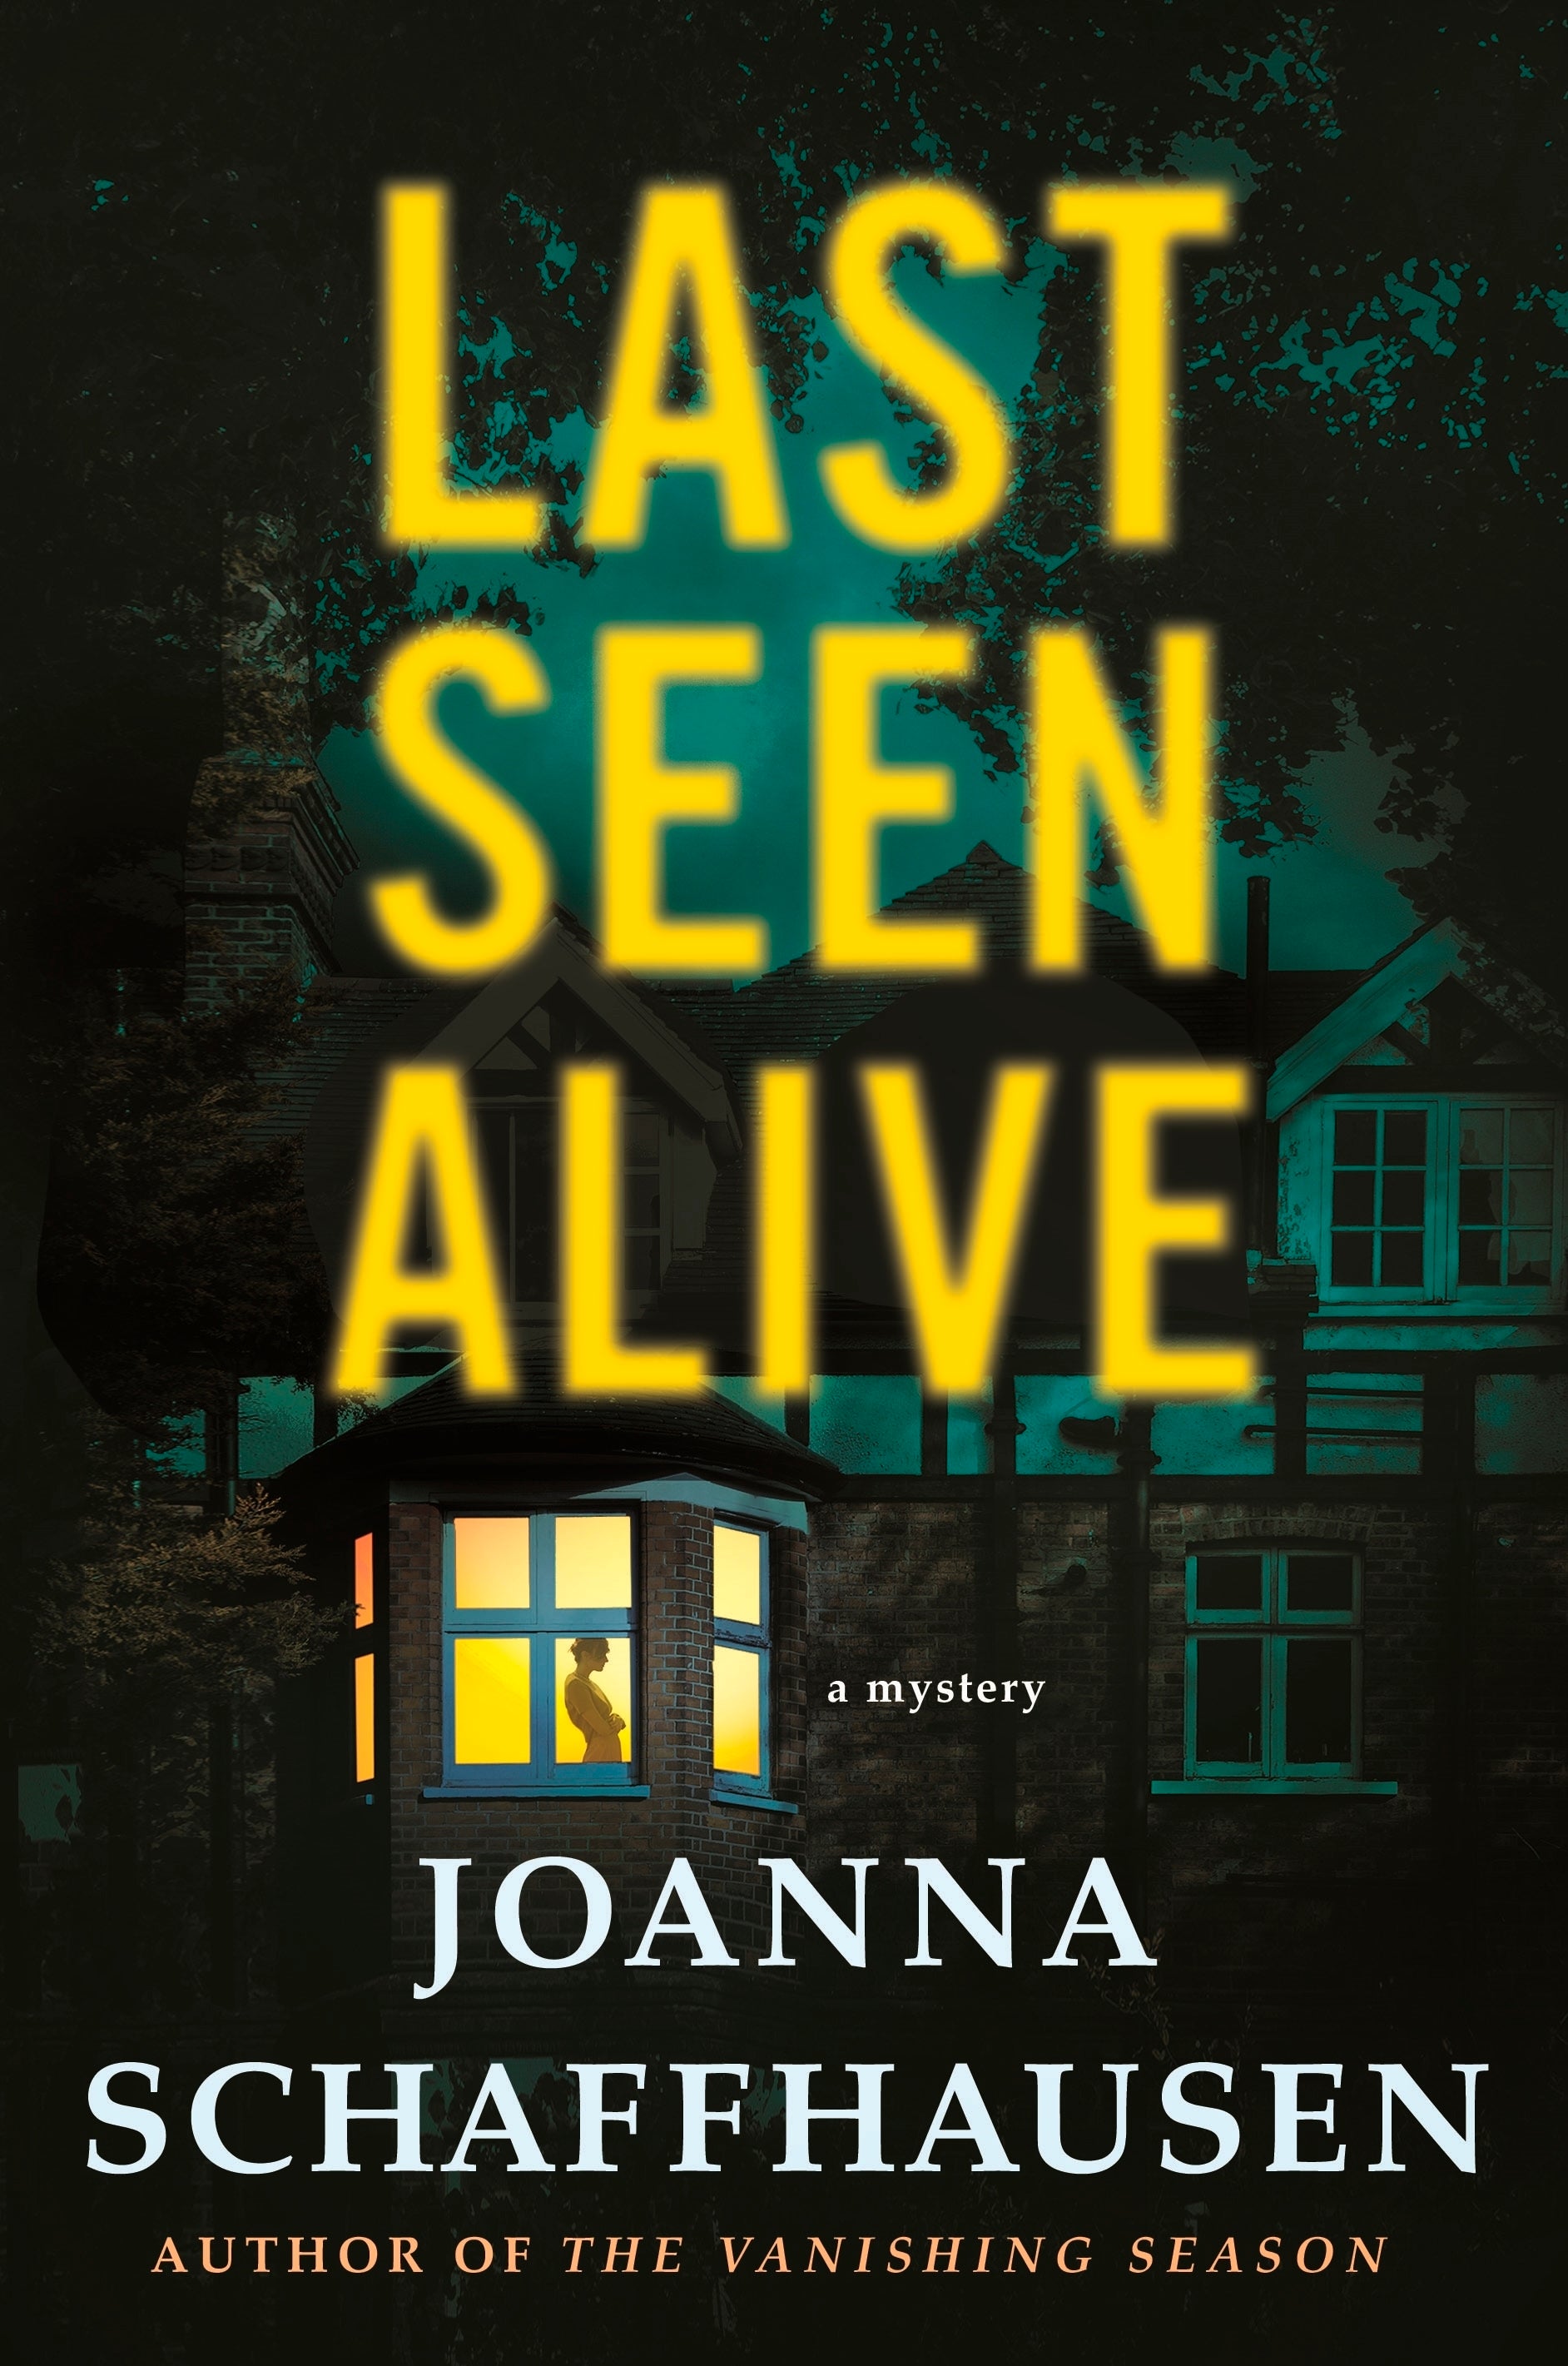 Book Review - Last Seen Alive